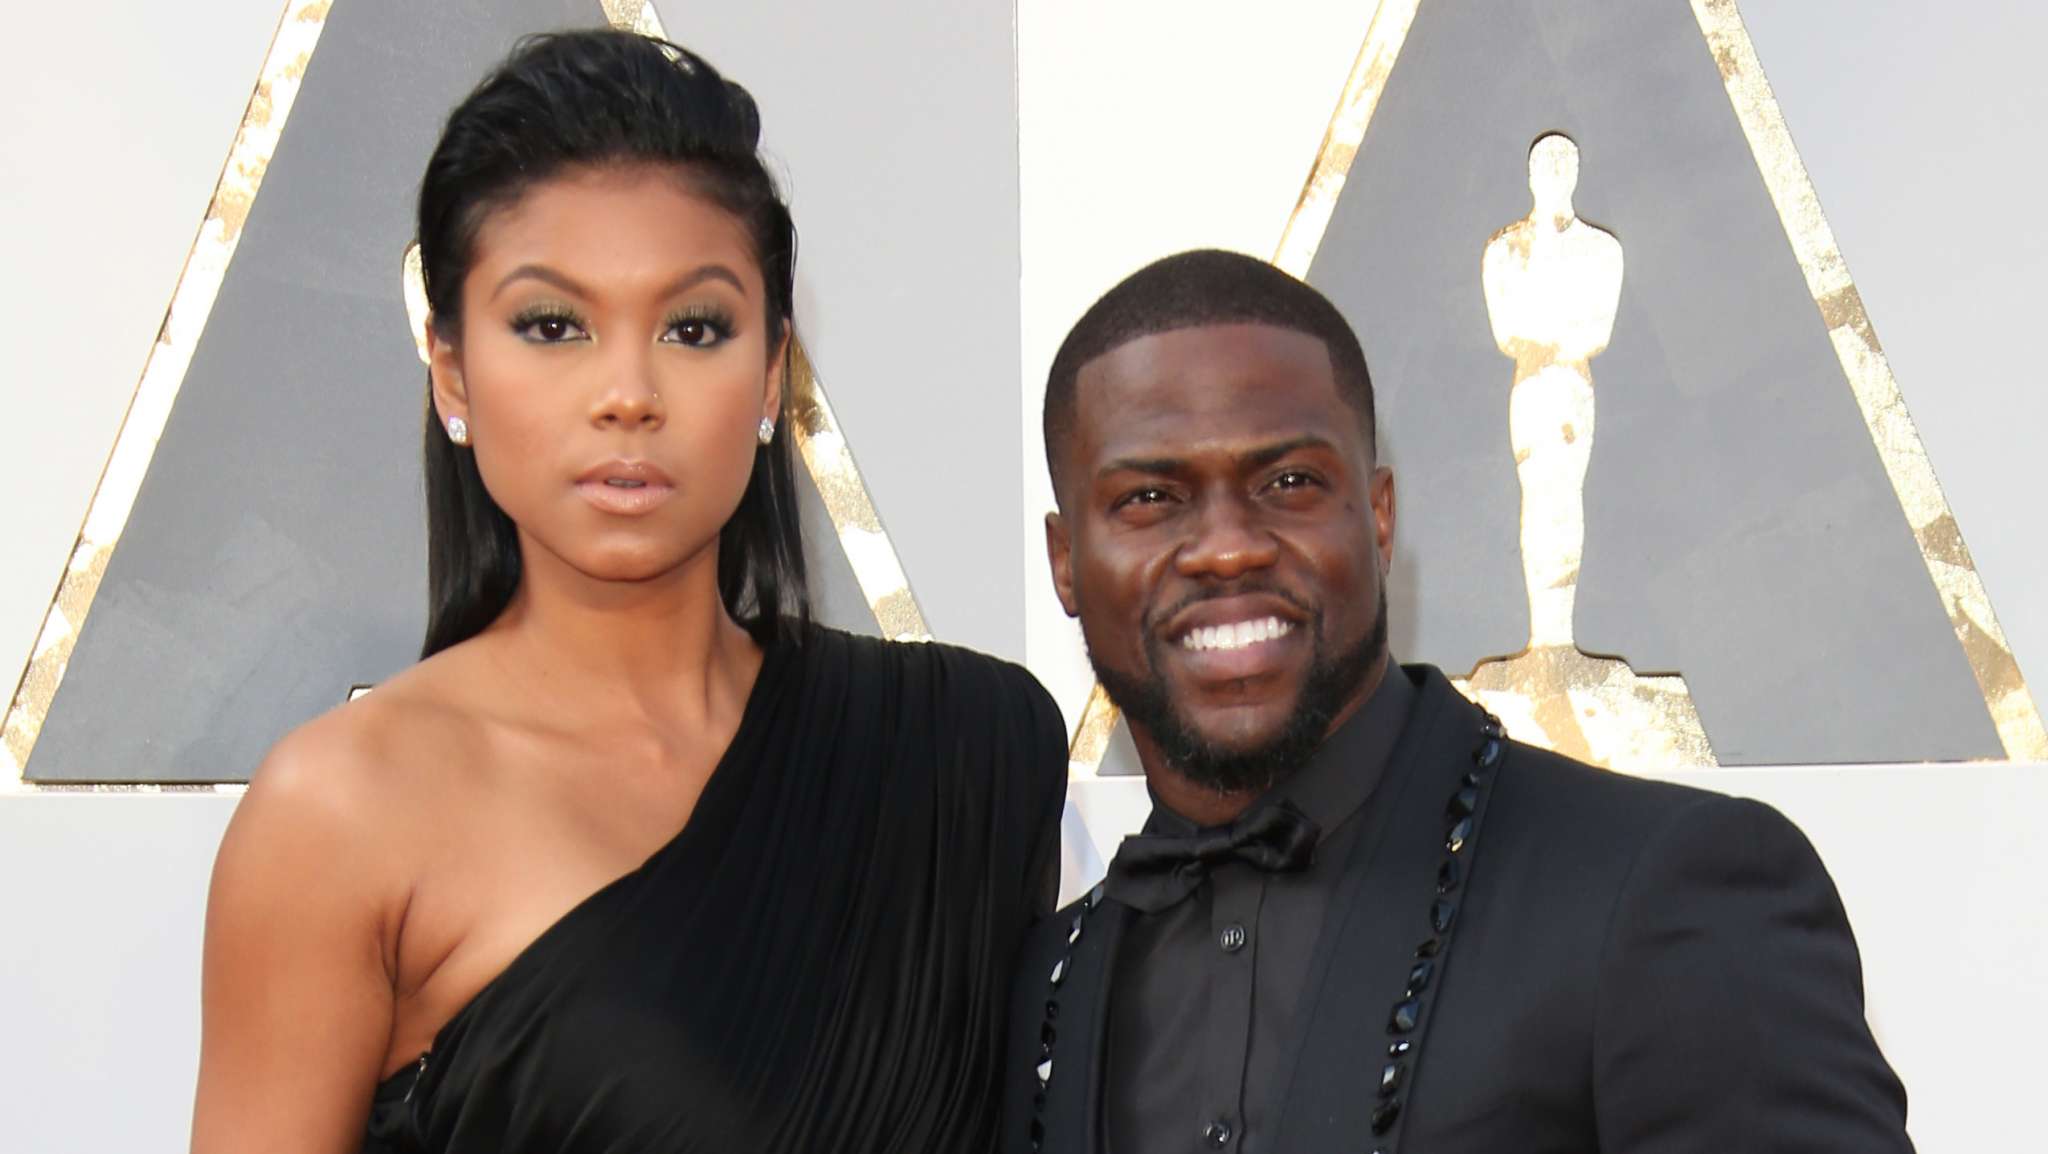 Kevin Hart's Wife, Eniko Hart Is Making Fun Of His '10 Year Challenge' Pics